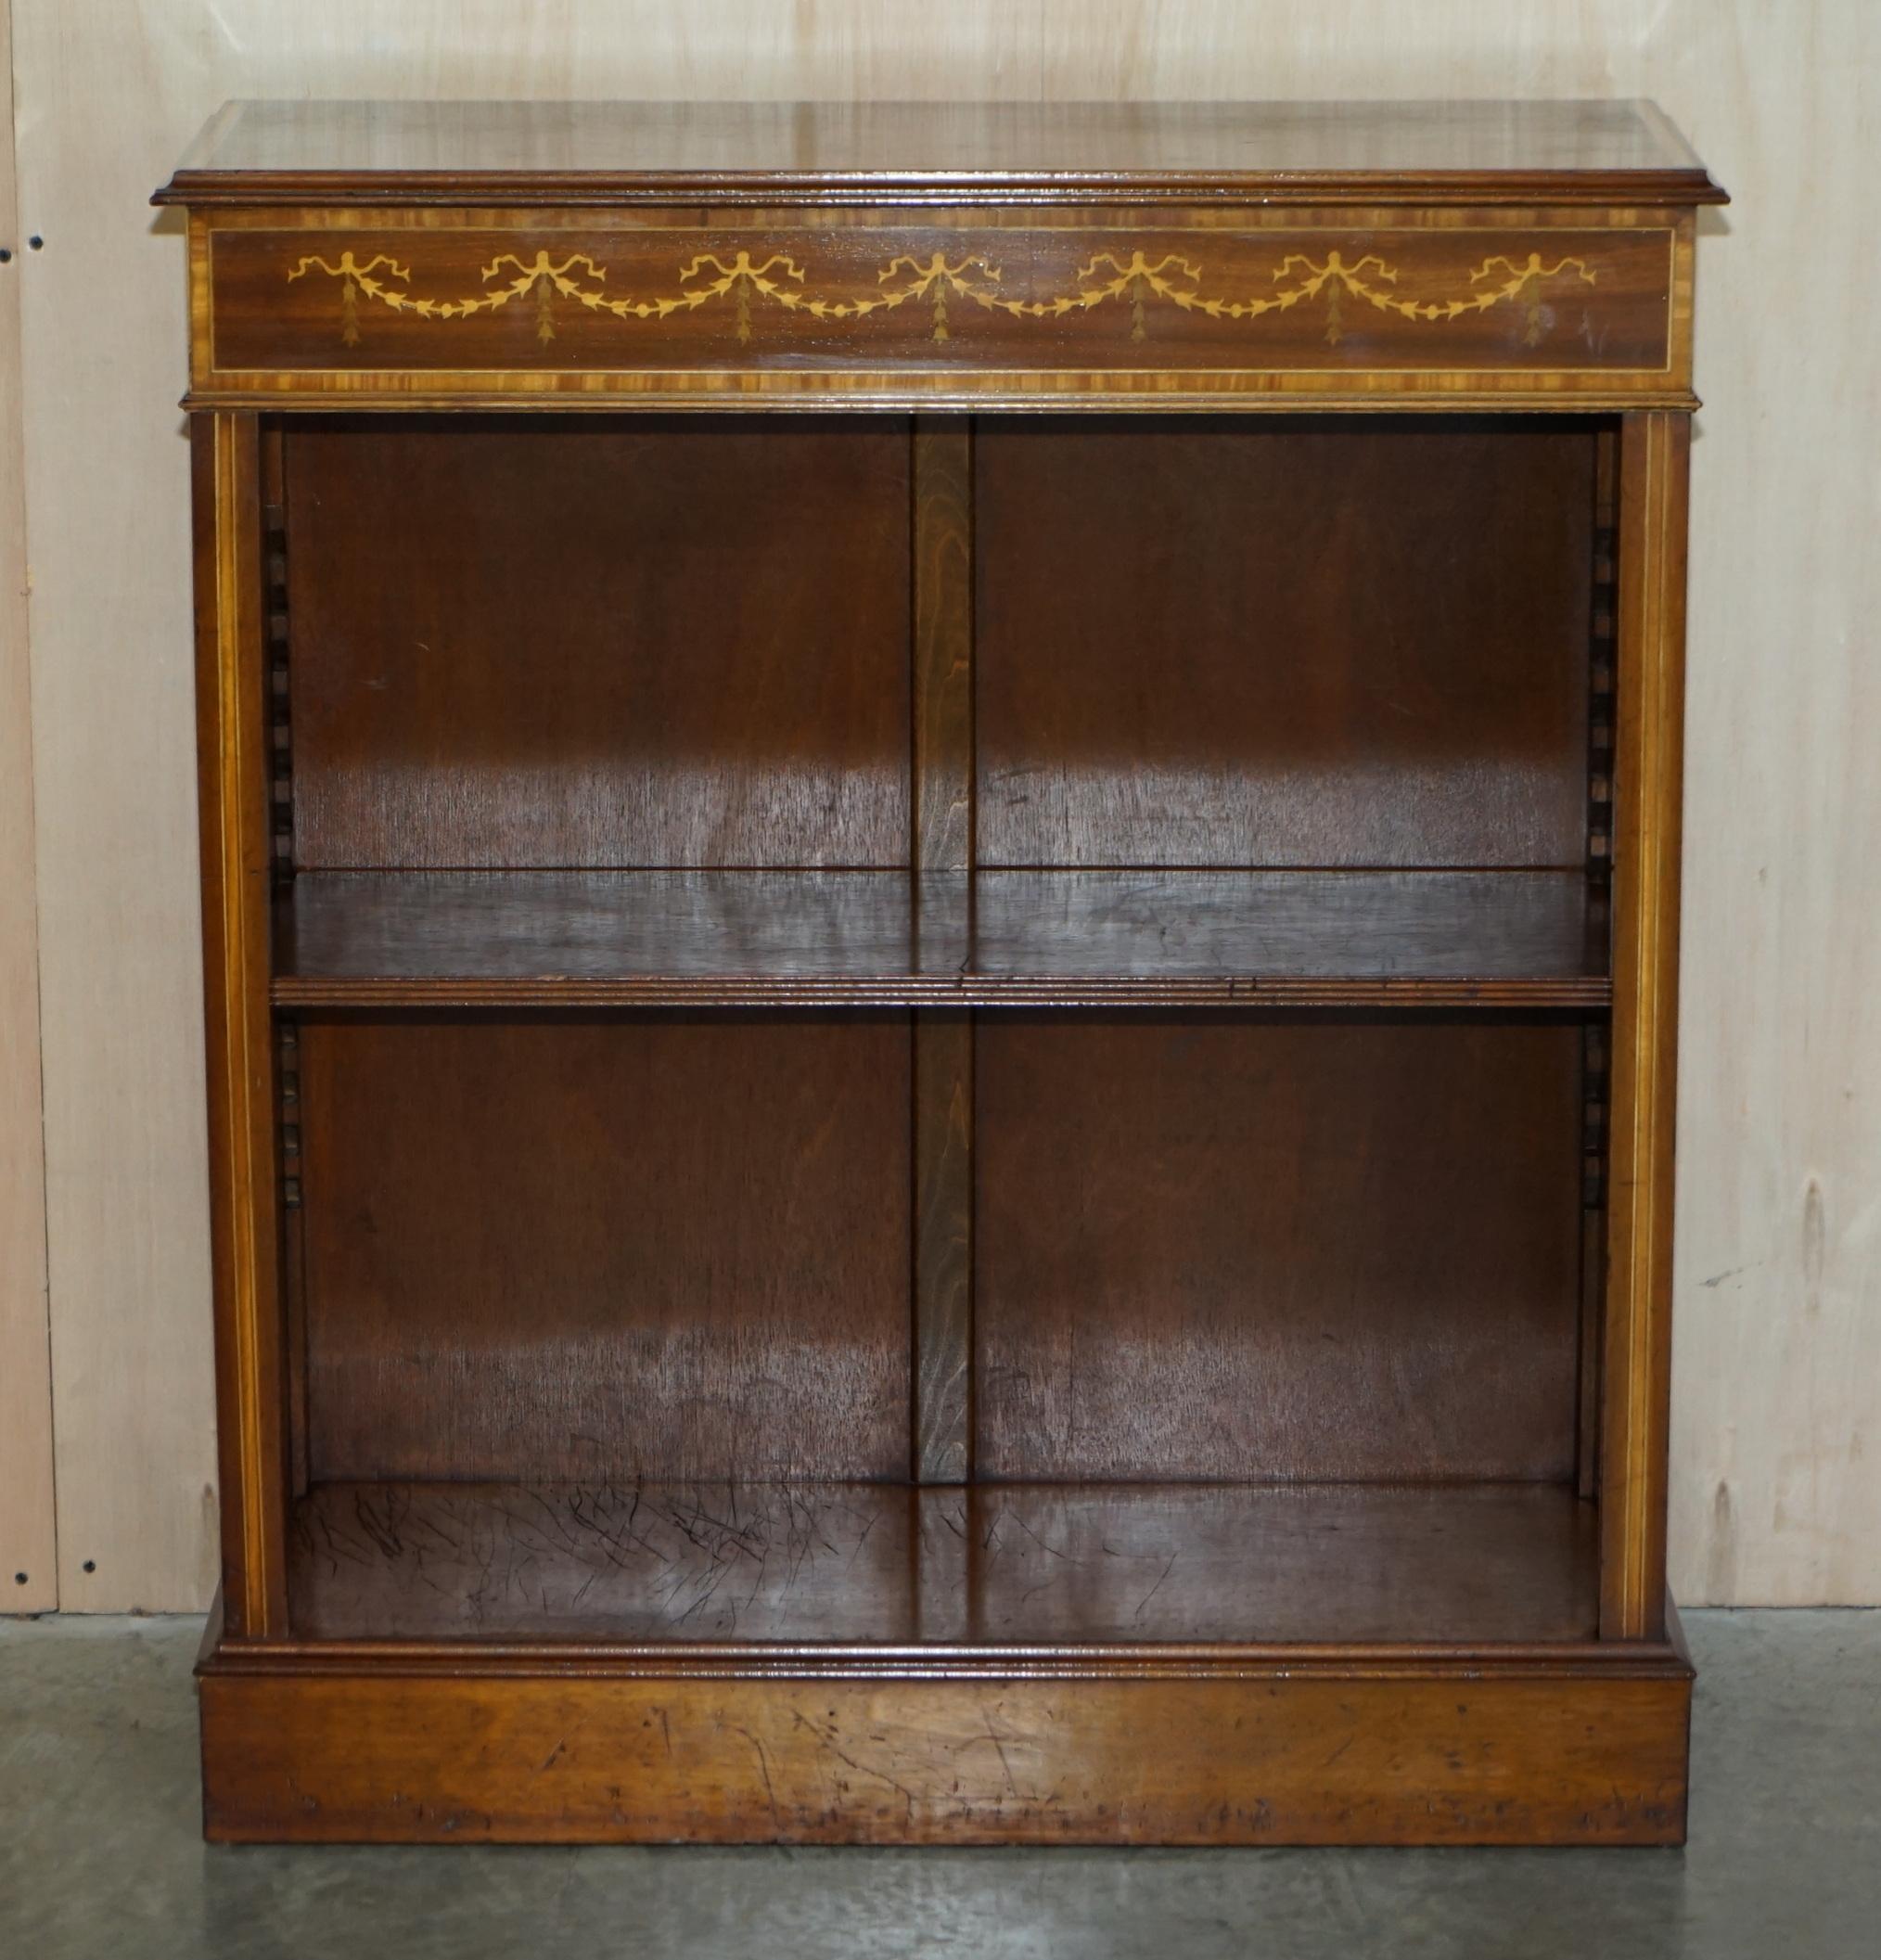 We are delighted to offer for this lovely Burr Elm, Walnut inlaid, Sheraton Revival style dwarf open library bookcase

A very good looking well made and decorative piece, the shelf is height adjustable and or removable so it can be adjusted to